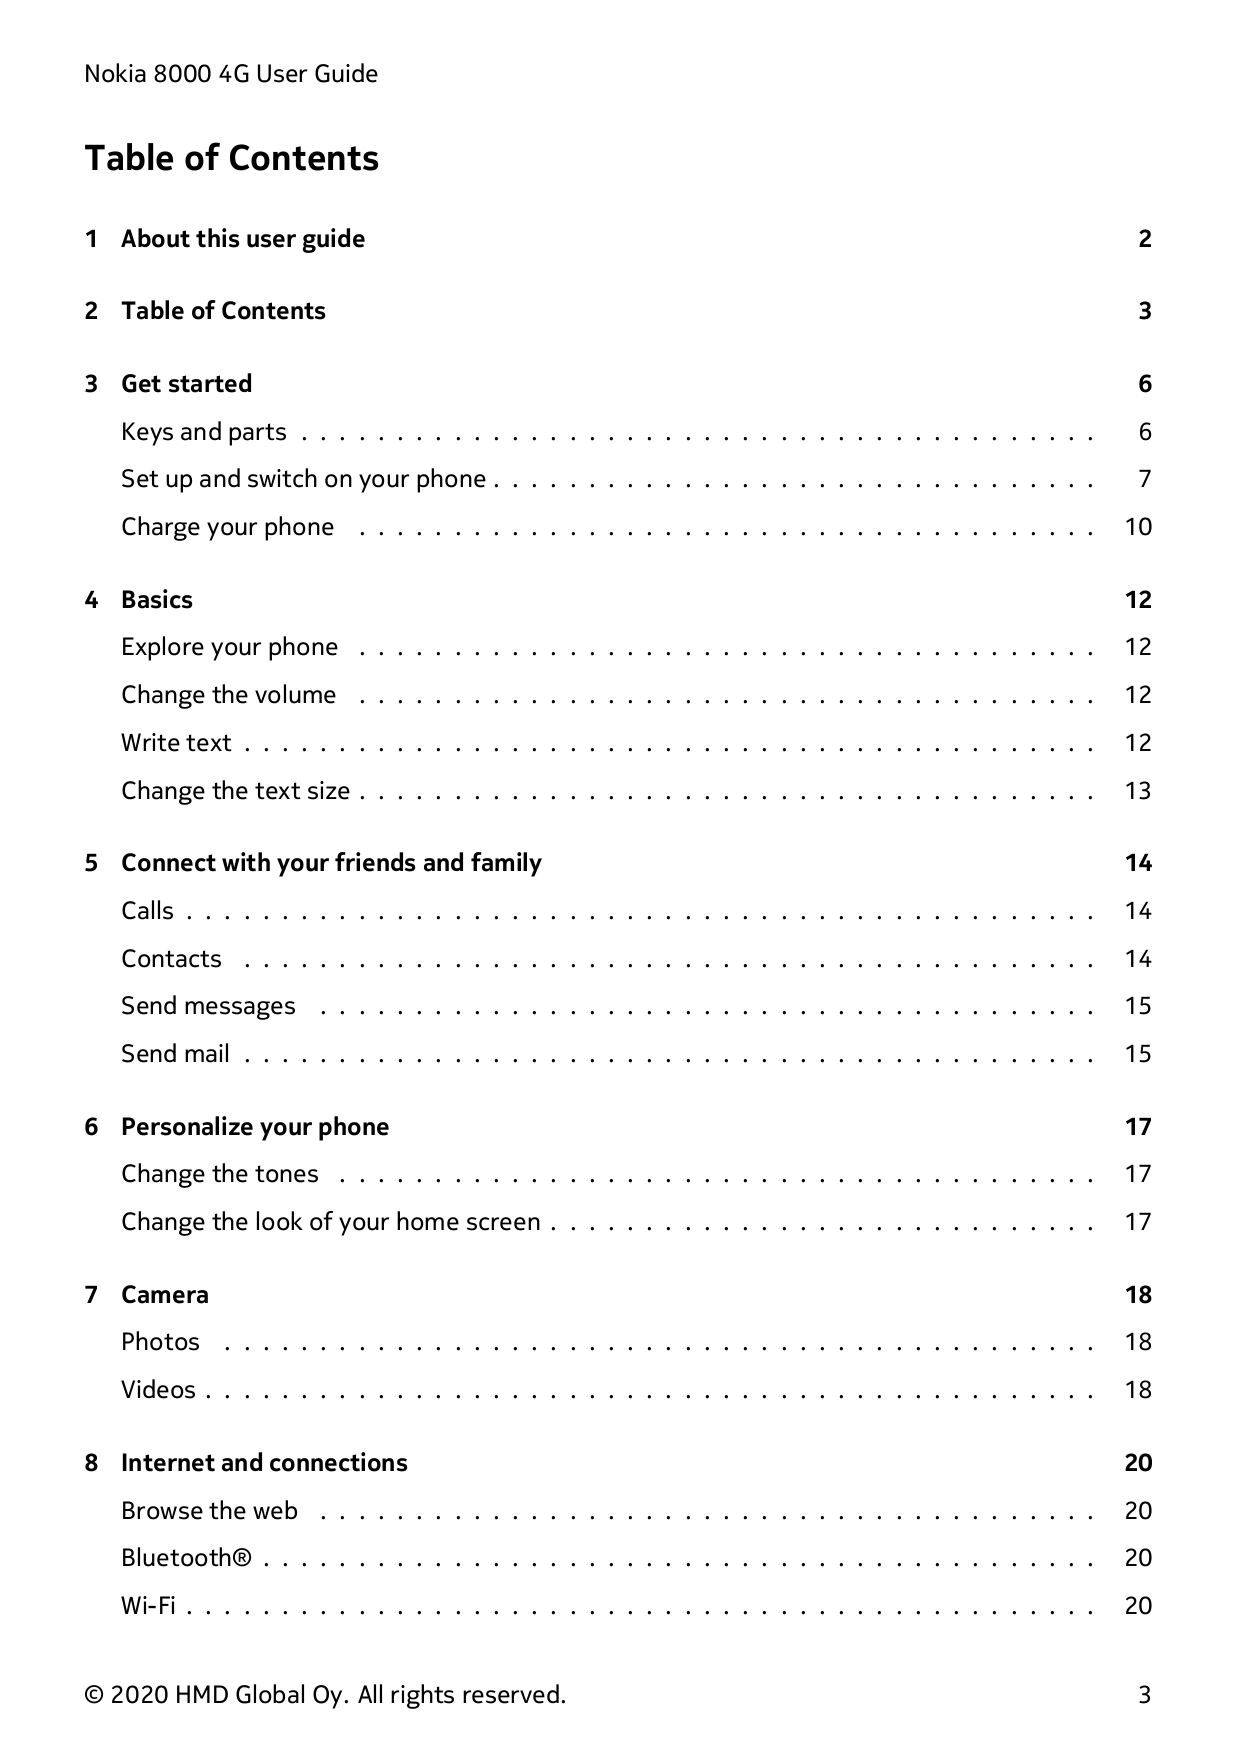 Nokia 8000 4G User GuideTable of Contents1 About this user guide22 Table of Contents33 Get started6Keys and parts . . . . . . . 